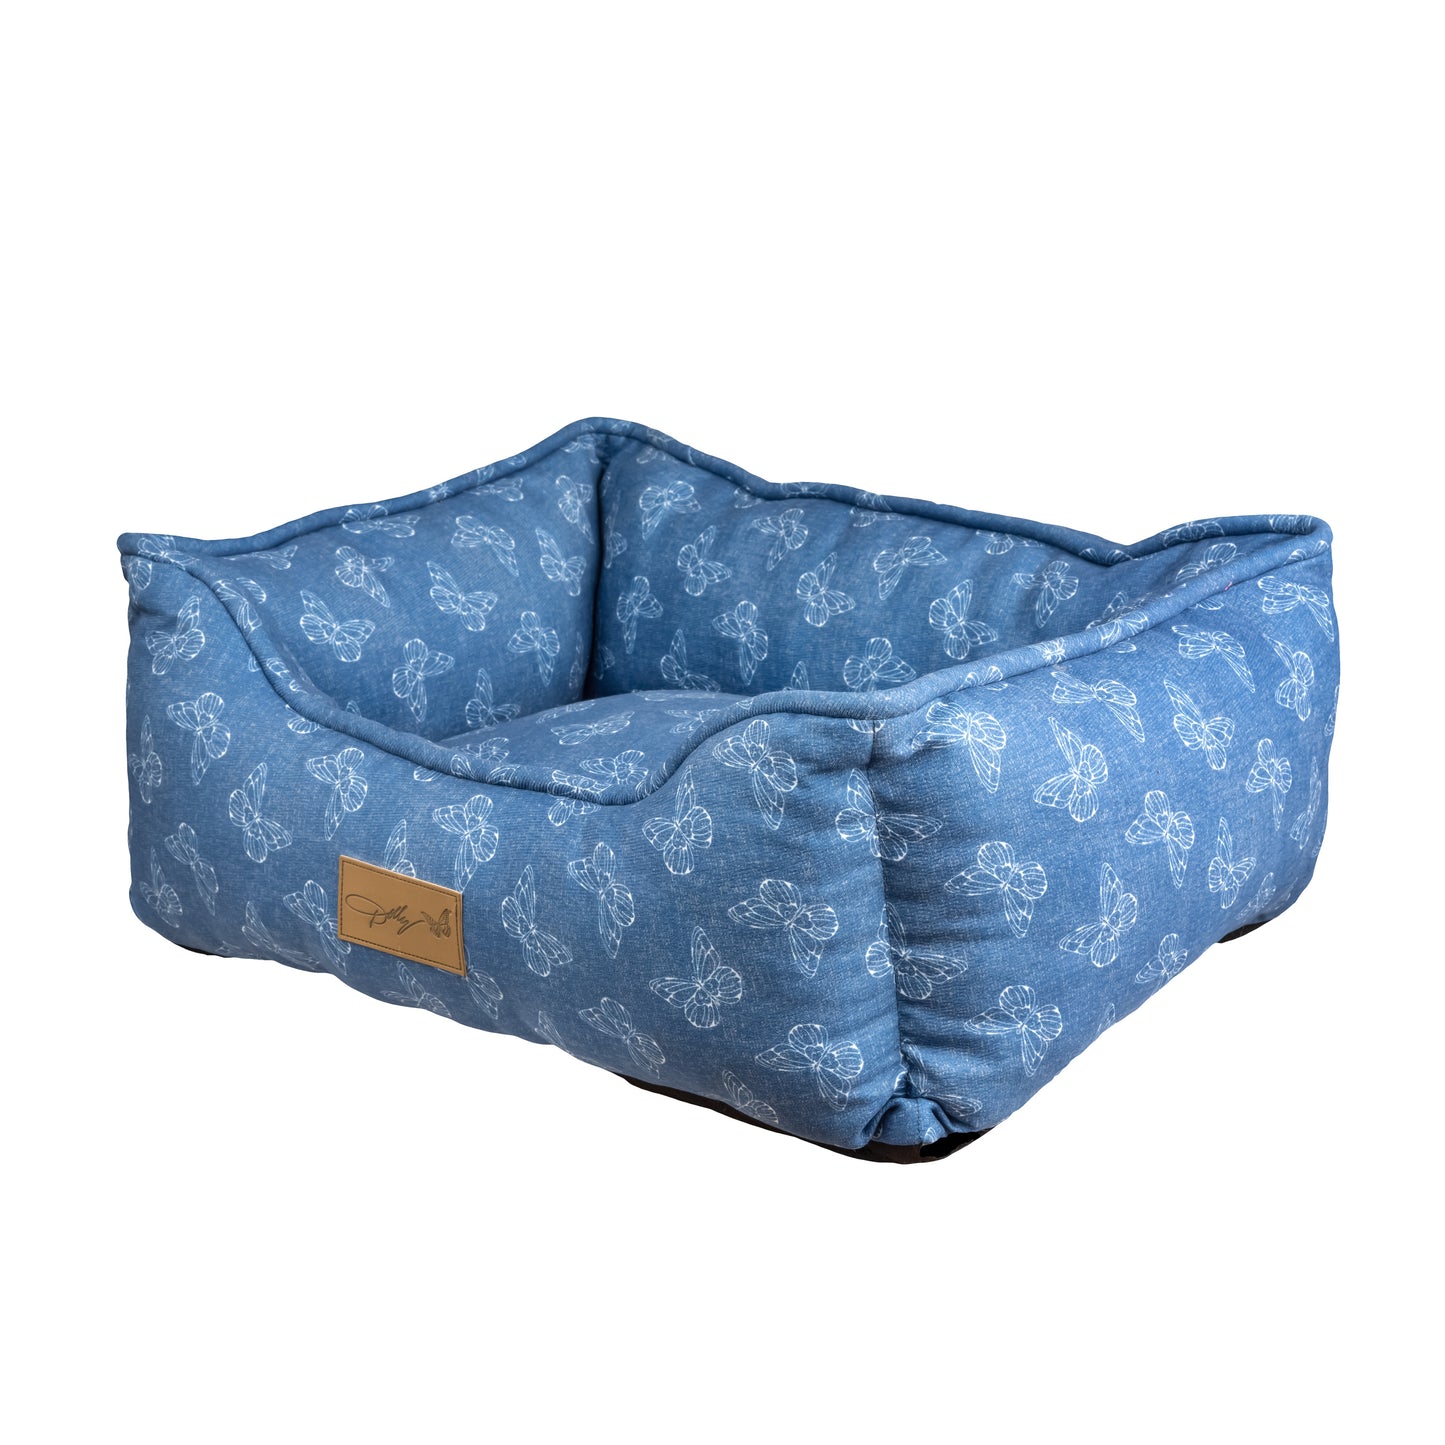 Rustic Denim Butterfly Cuddle Bed for Pets - Blue